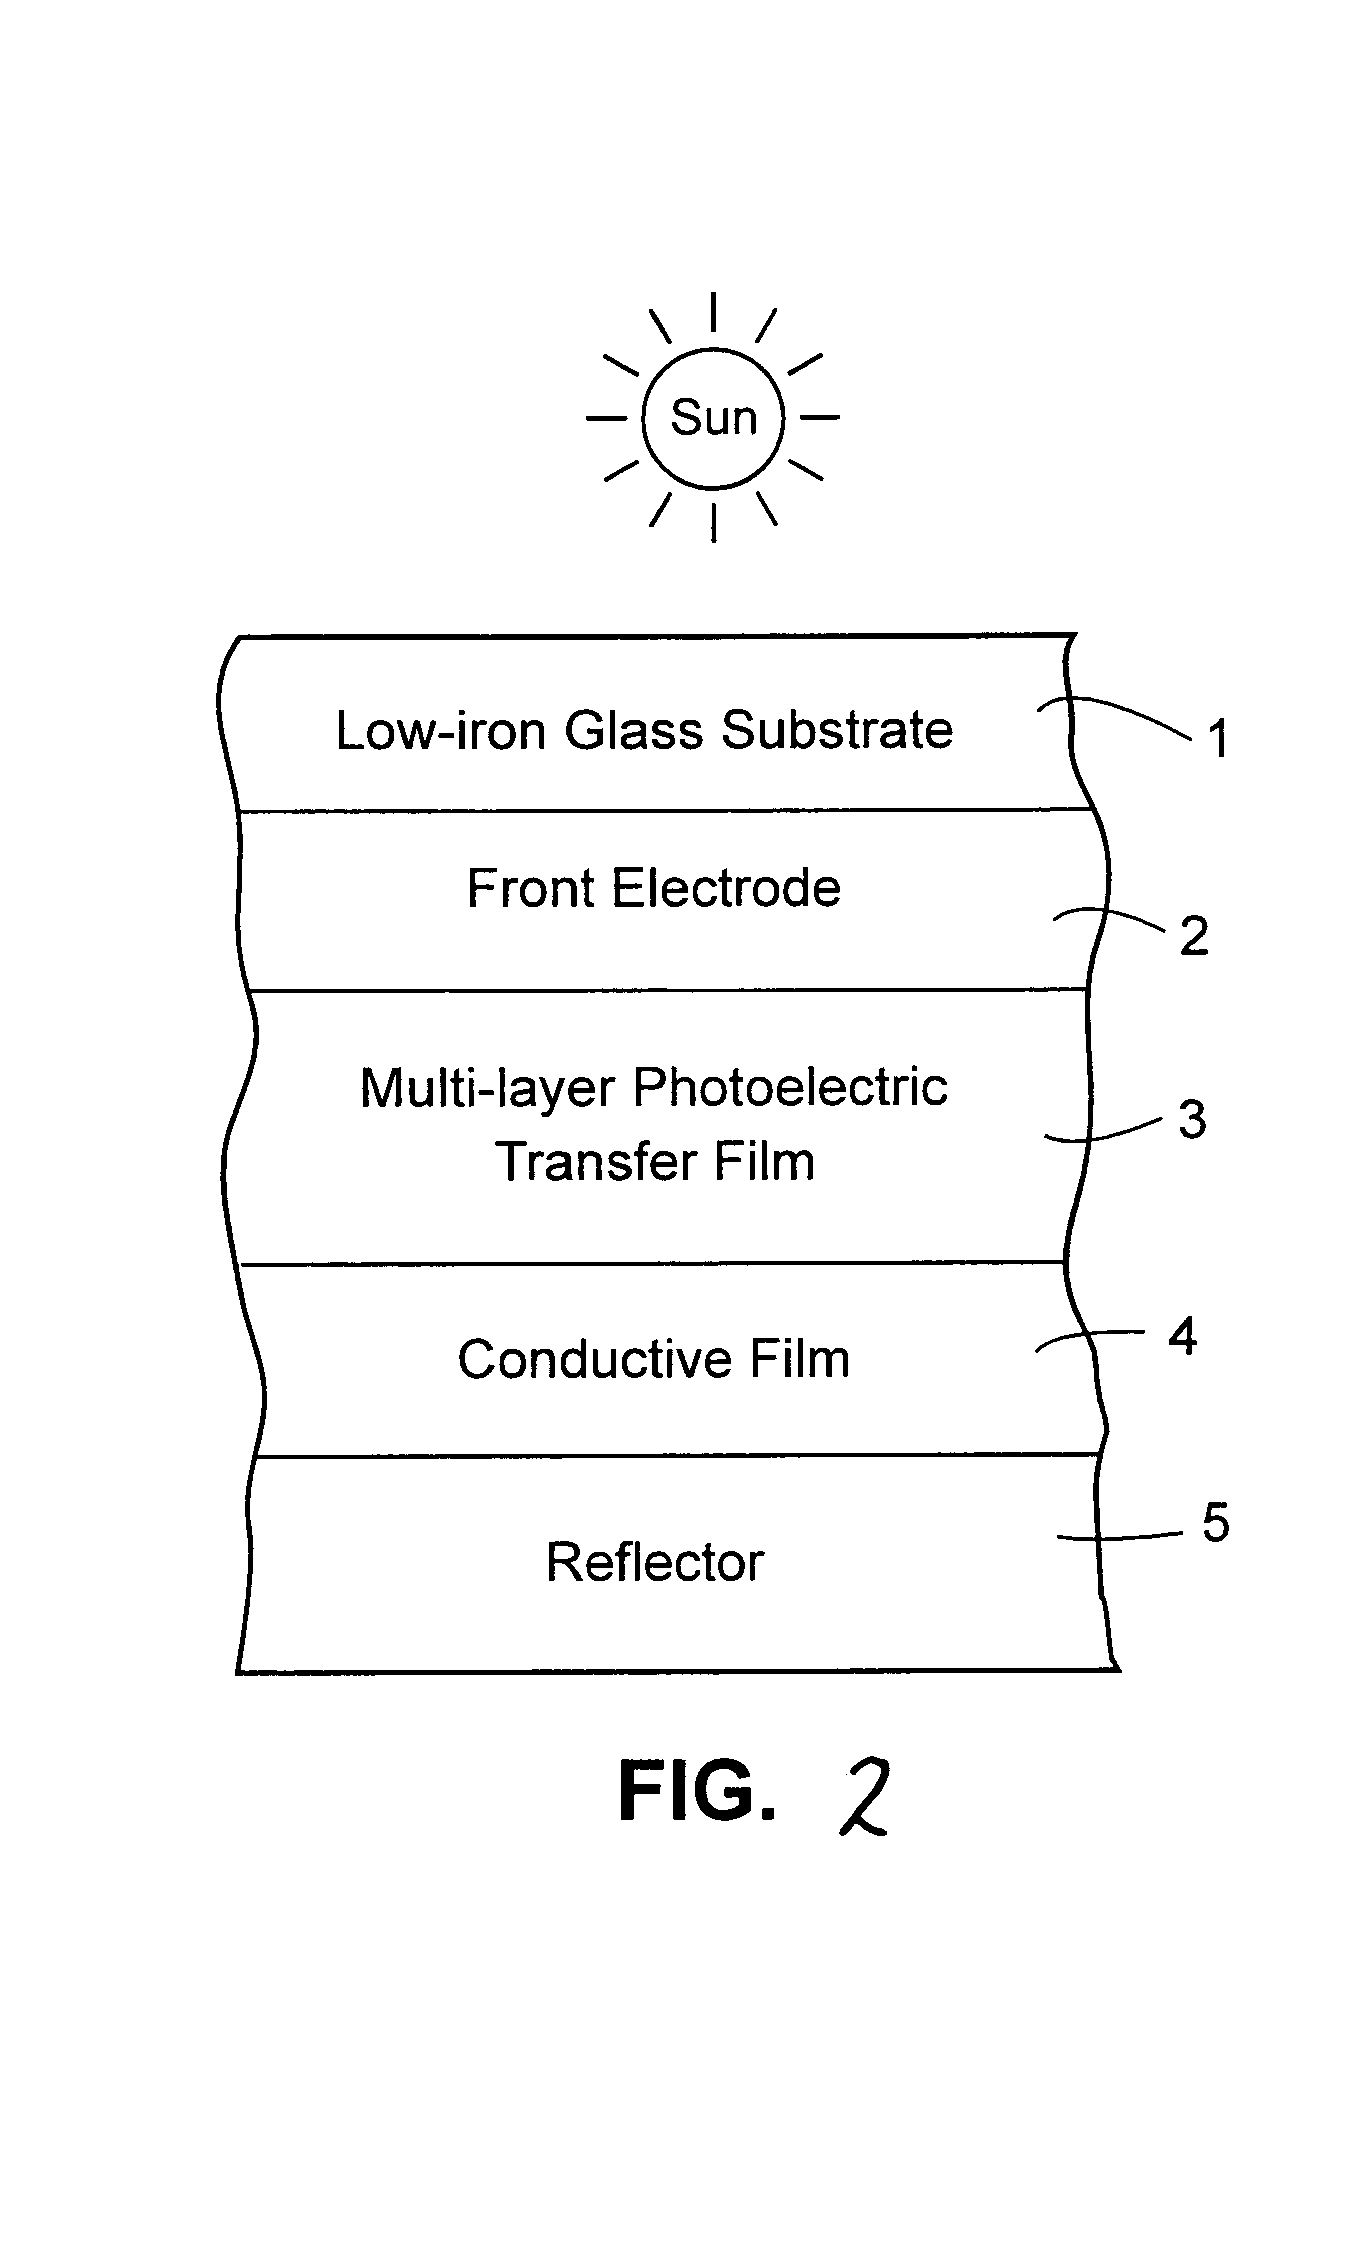 Low iron high transmission float glass for solar cell applications and method of making same